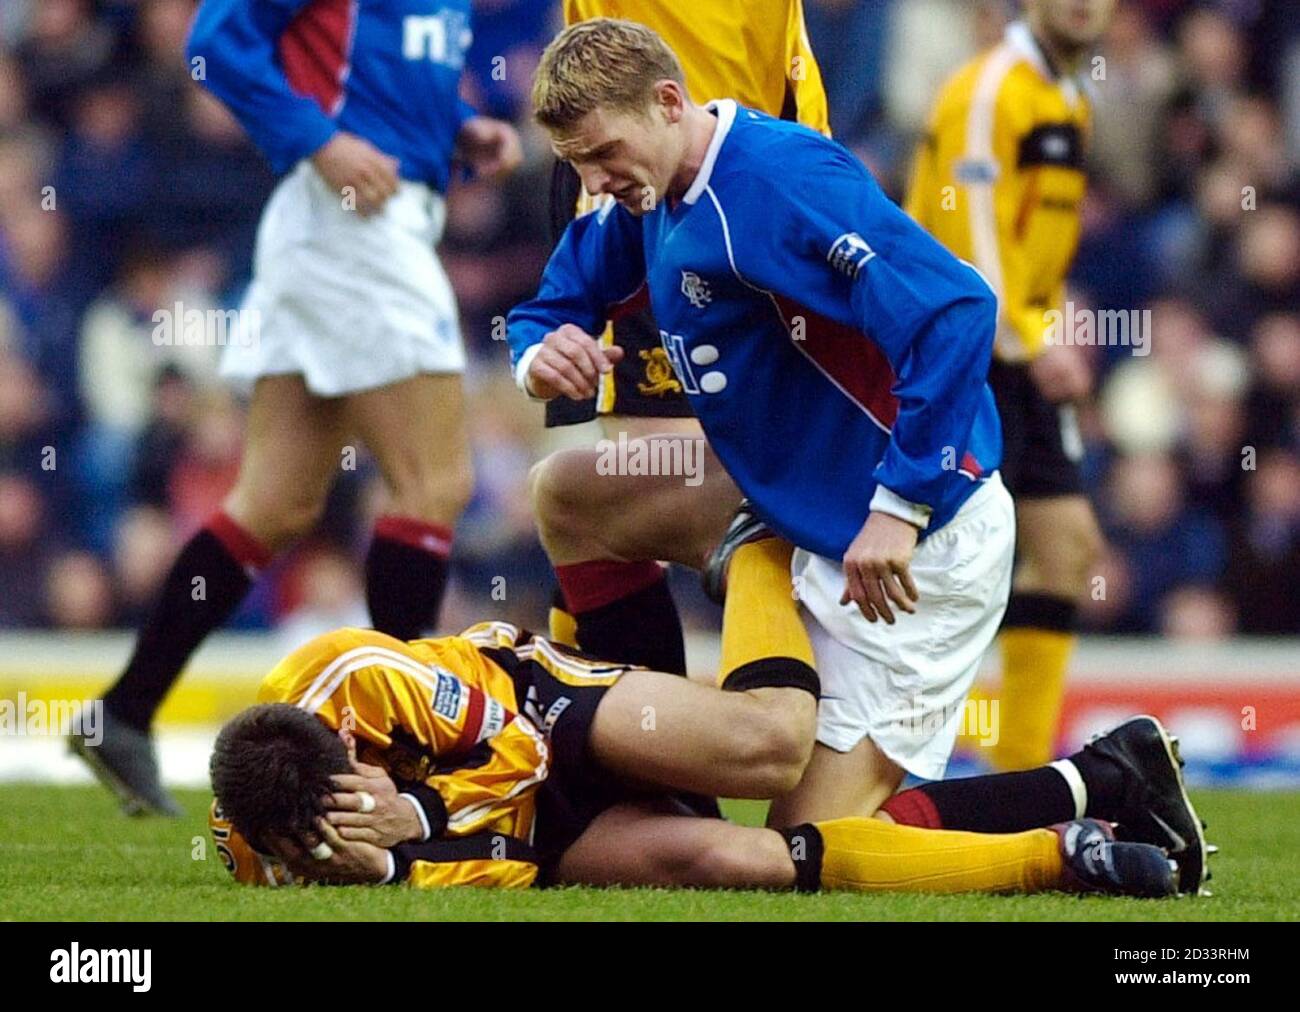 Rangers' Tore Andre Flo looks down at Livingston's Oscar Rubio who clutches his hands to his injured nose, before leaving the field at today's Scottish Premier League match at Glasgow's Ibrox stadium. Stock Photo